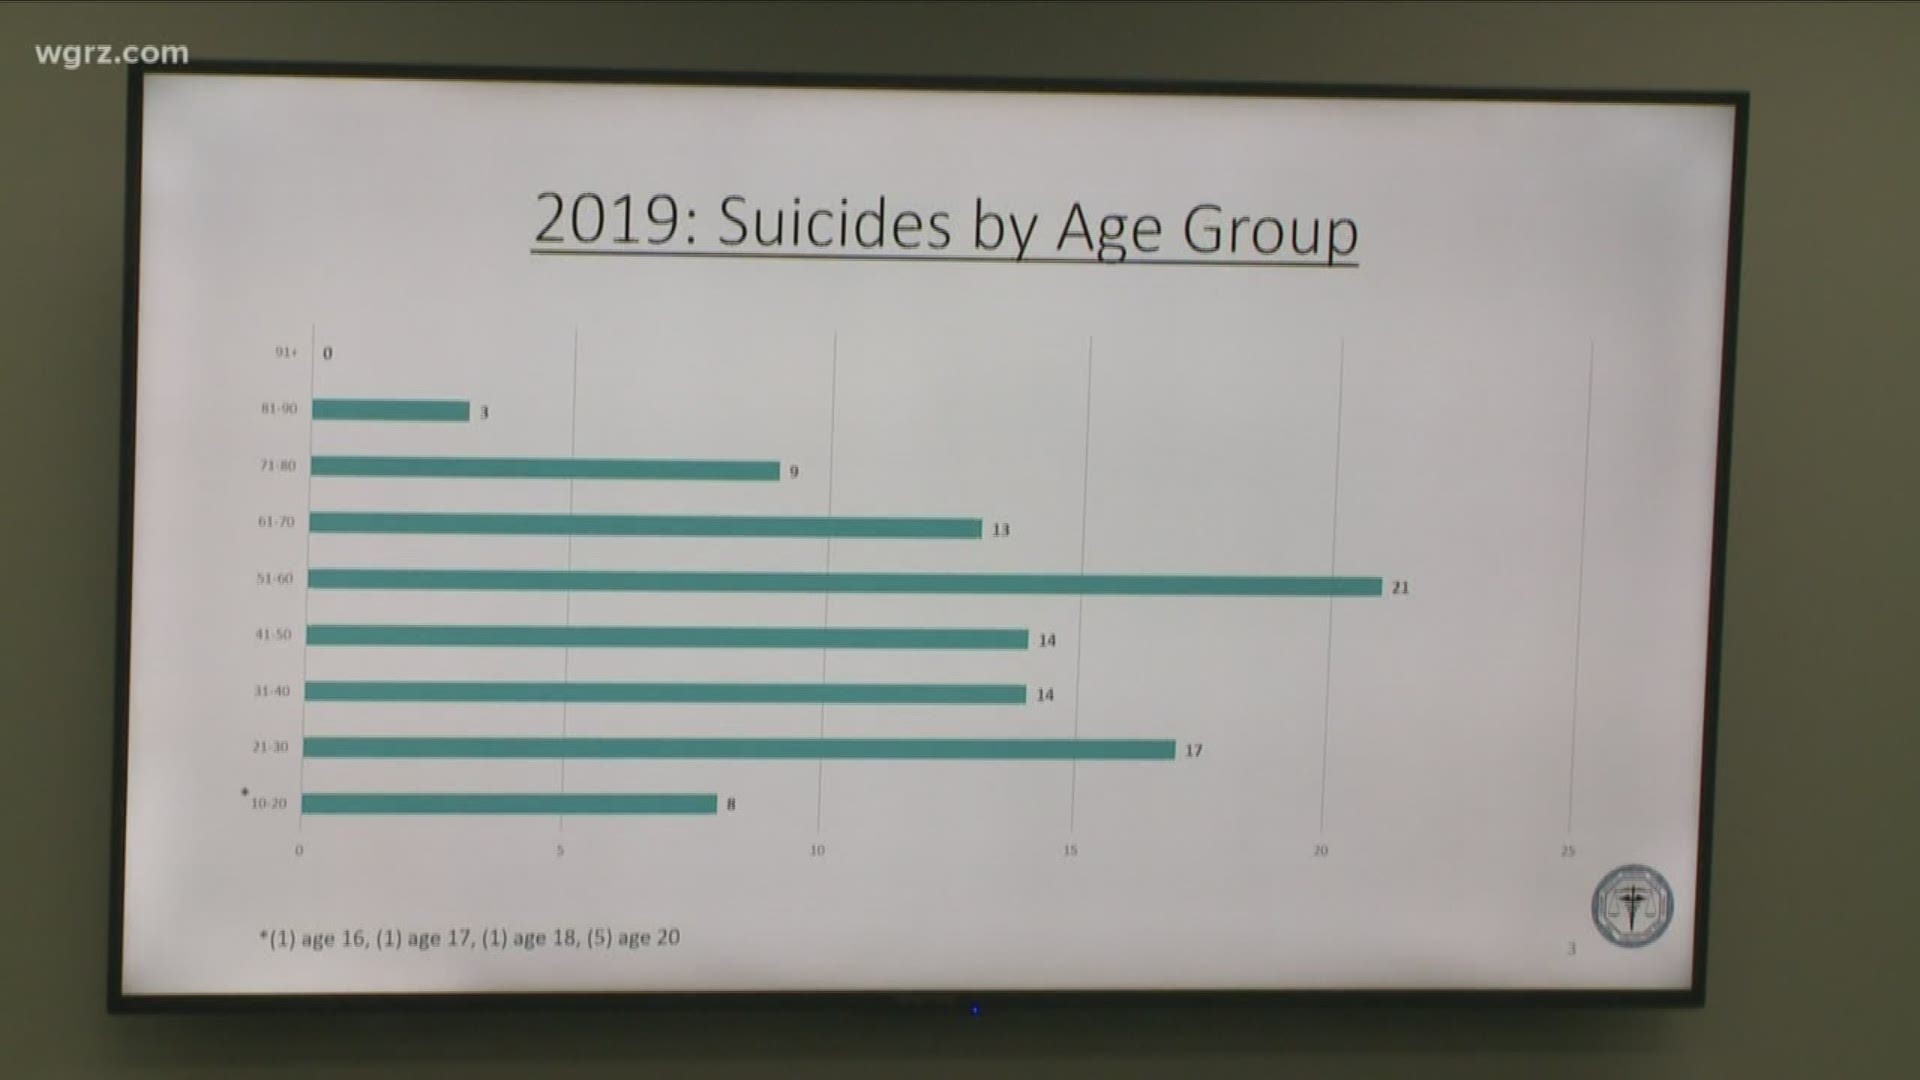 Middle-aged men do have the highest suicide rate in Erie County but there is some encouraging news in that those numbers have been going down.